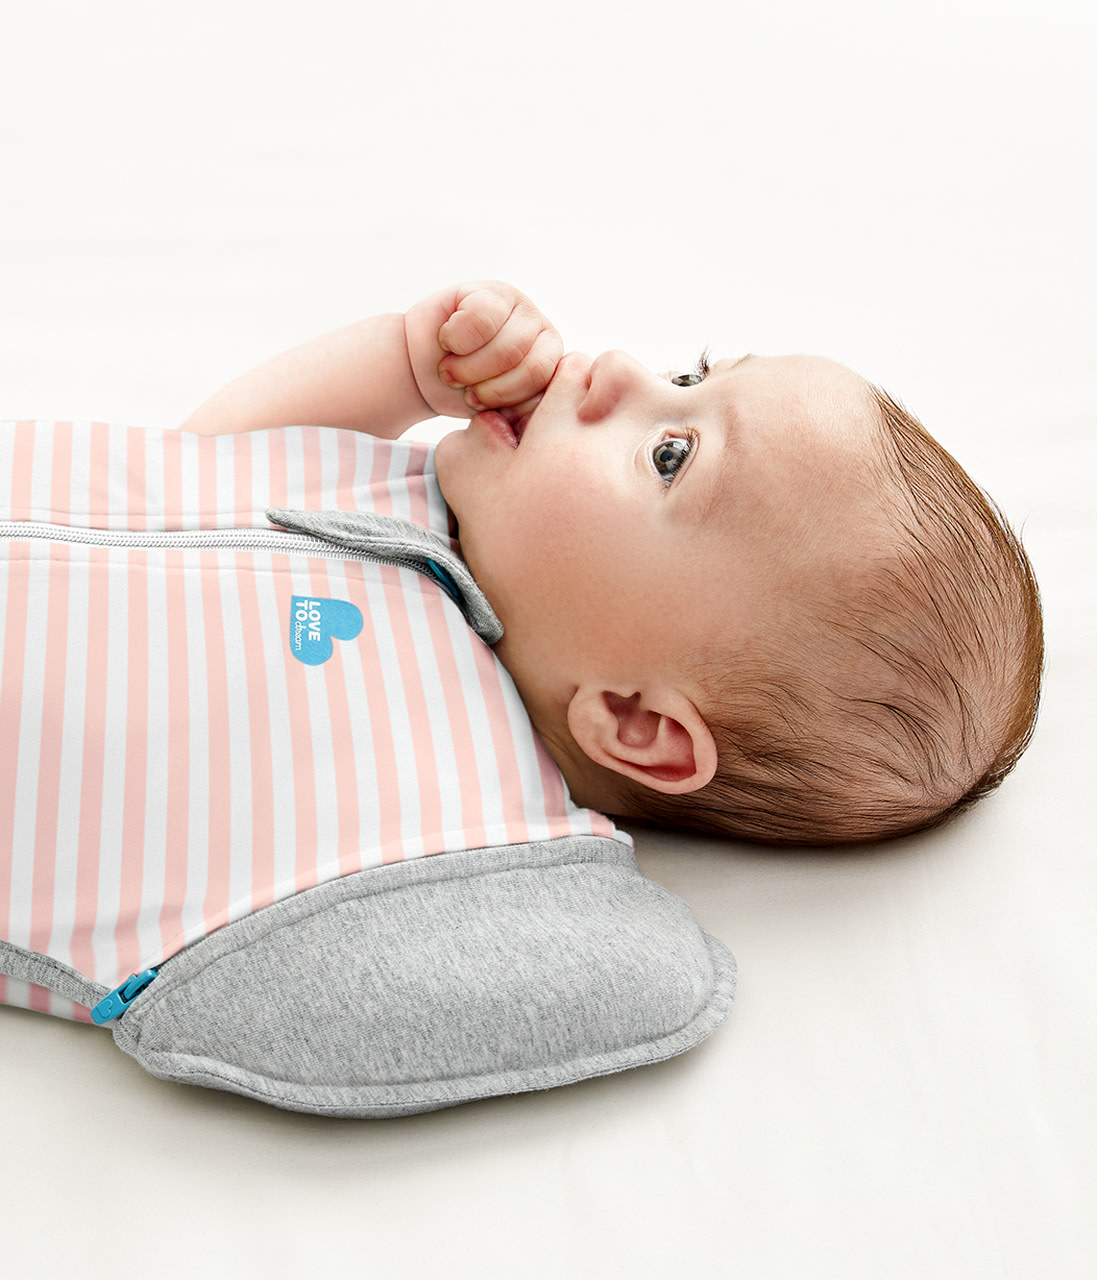 Love To Dream Love To Dream Swaddle UP™ Transition Bag Original 1.0 TOG Dusty Pink & White Stripe